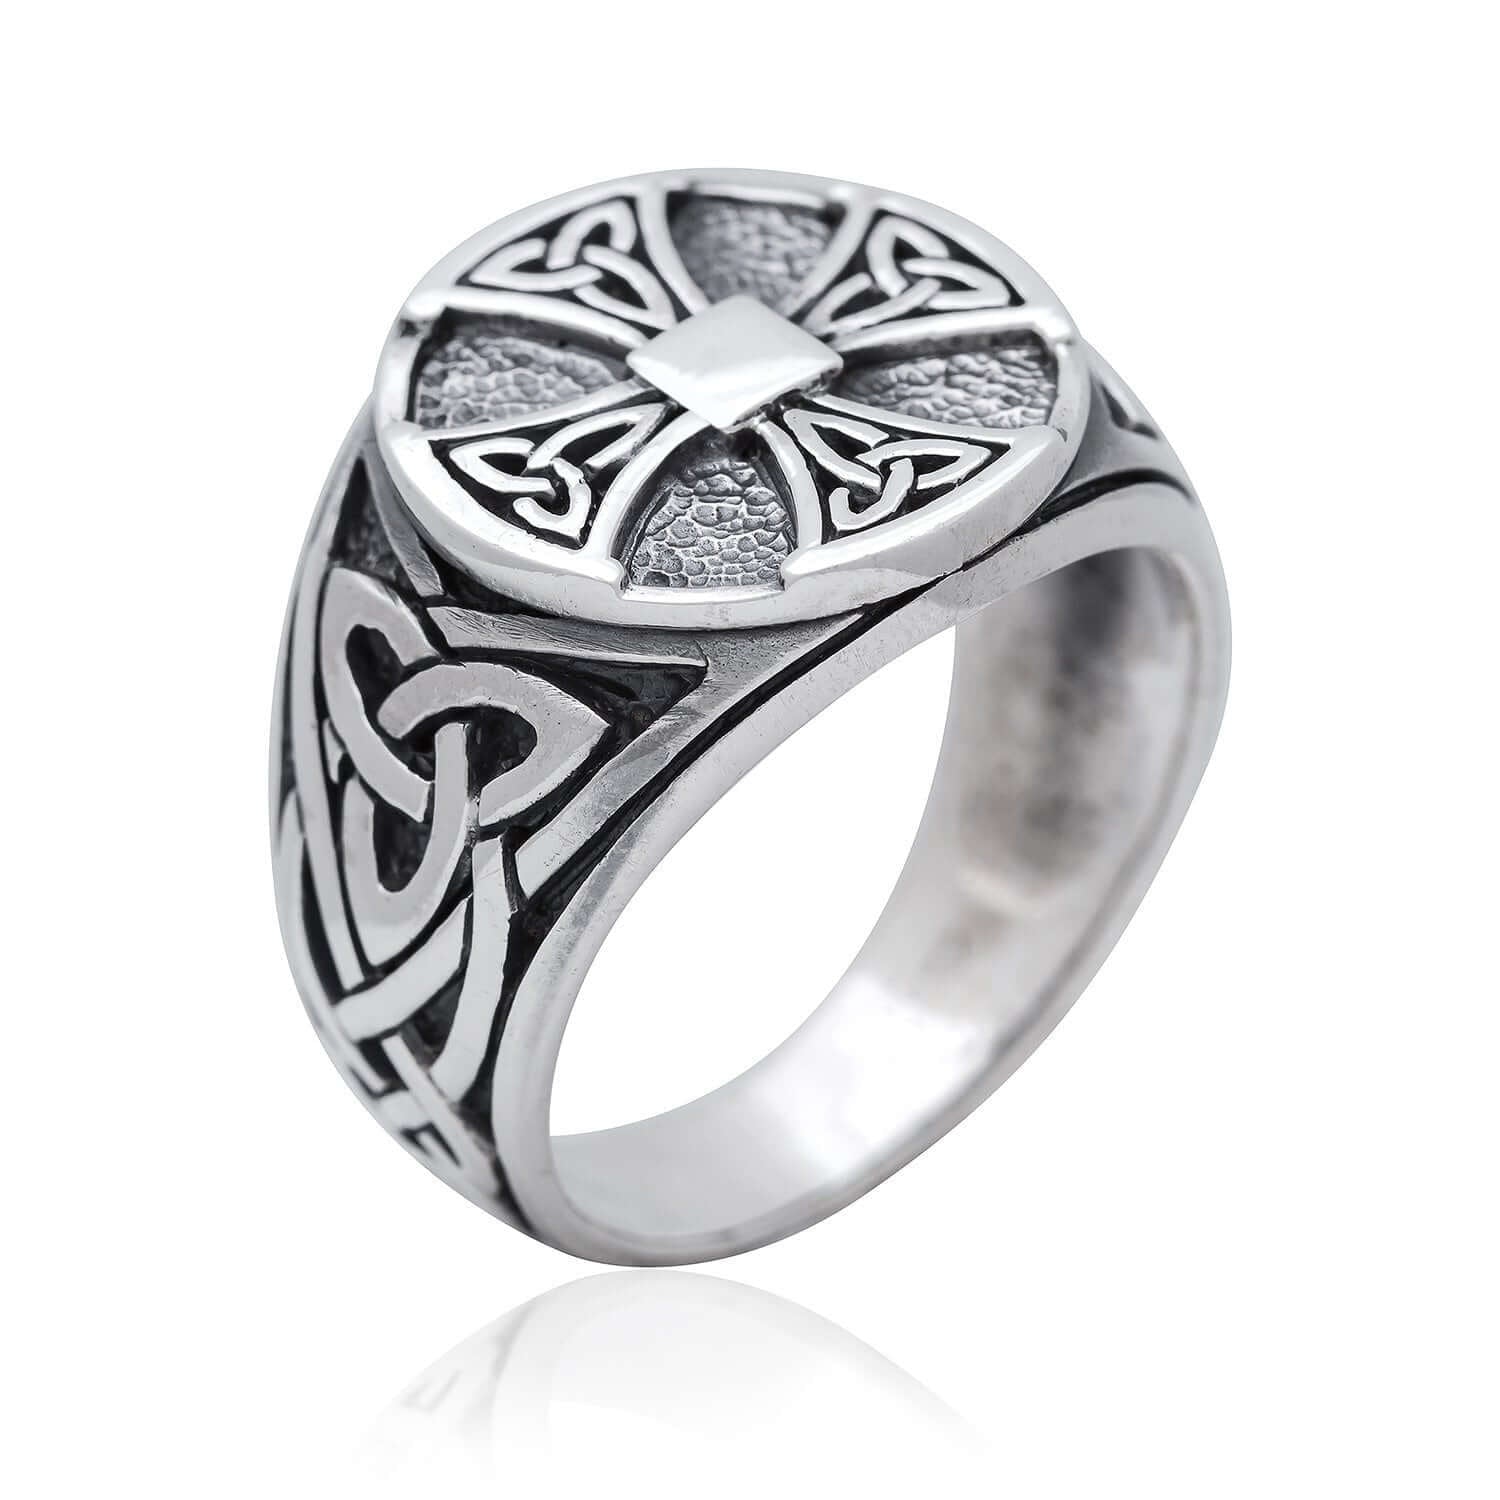 925 Sterling Silver Canterbury Cross Ring - SilverMania925